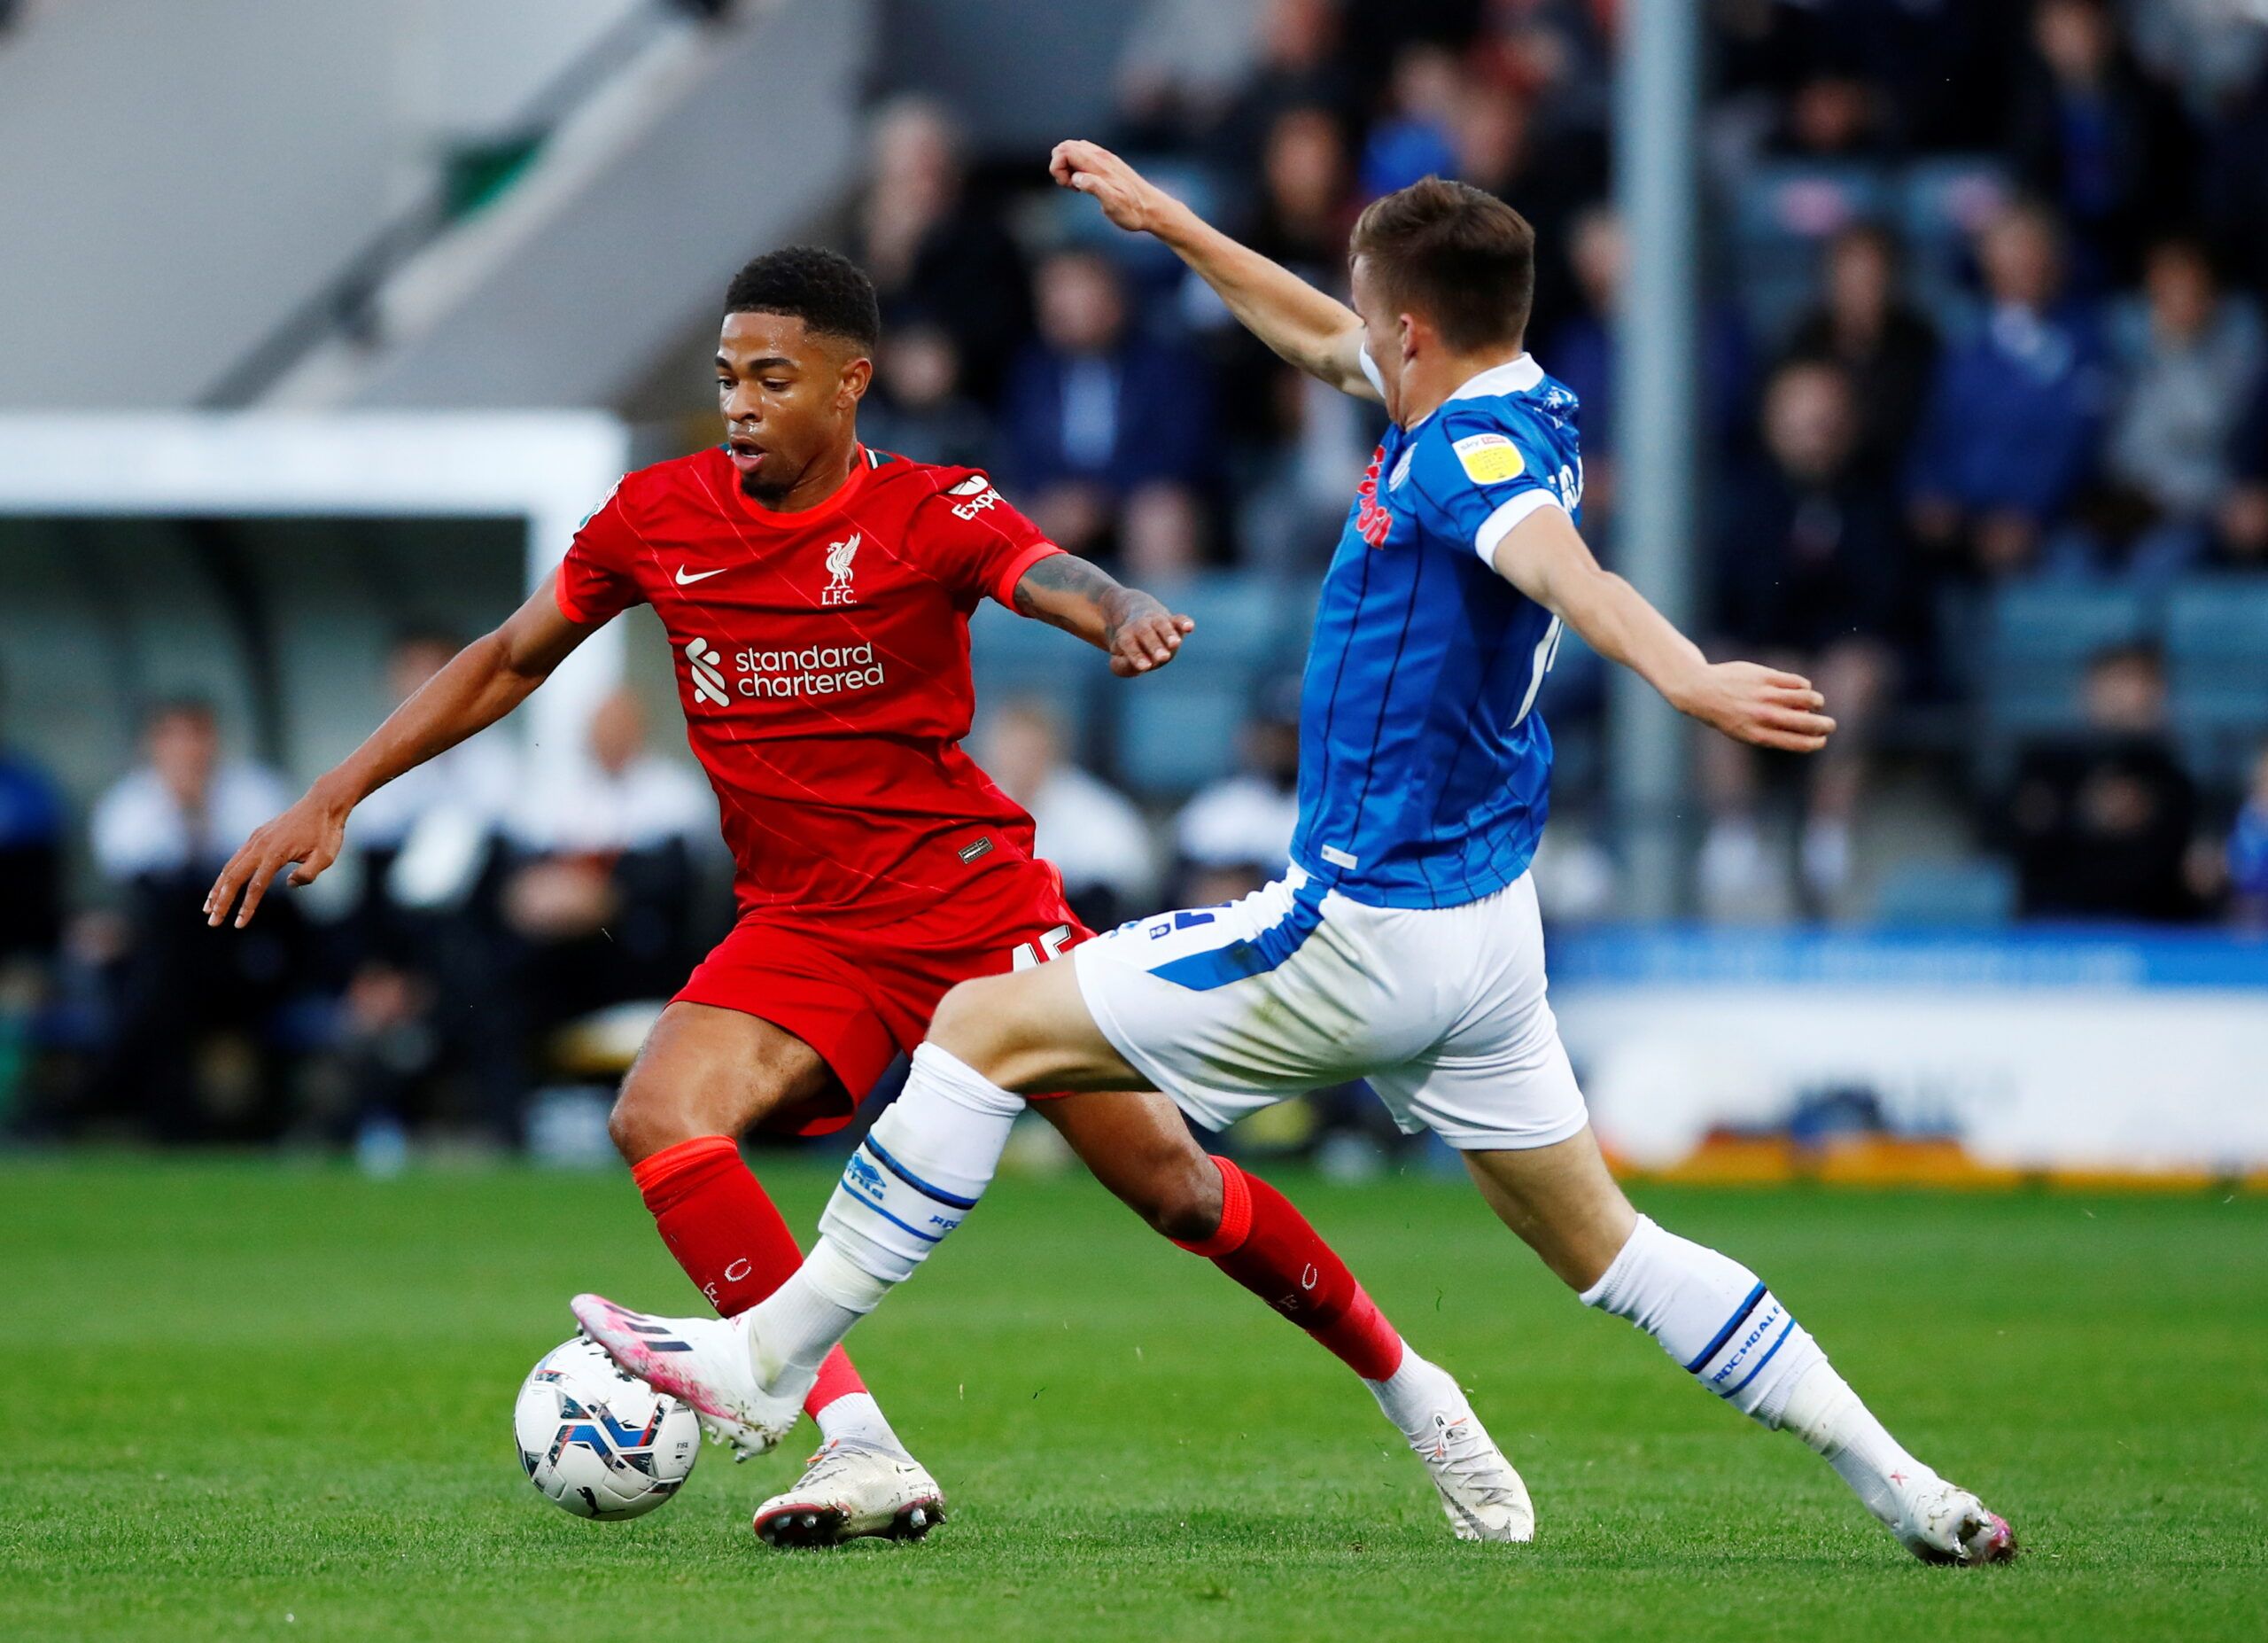 Soccer Football - EFL Trophy - Group Stage - Northern Group D - Rochdale v Liverpool U21 - Spotland Stadium, Rochdale, Britain - August 31, 2021  Liverpool's Elijah Dixon-Bonner in action with Rochdale's George Broadbent  Action Images/Jason Cairnduff  EDITORIAL USE ONLY. No use with unauthorized audio, video, data, fixture lists, club/league logos or 